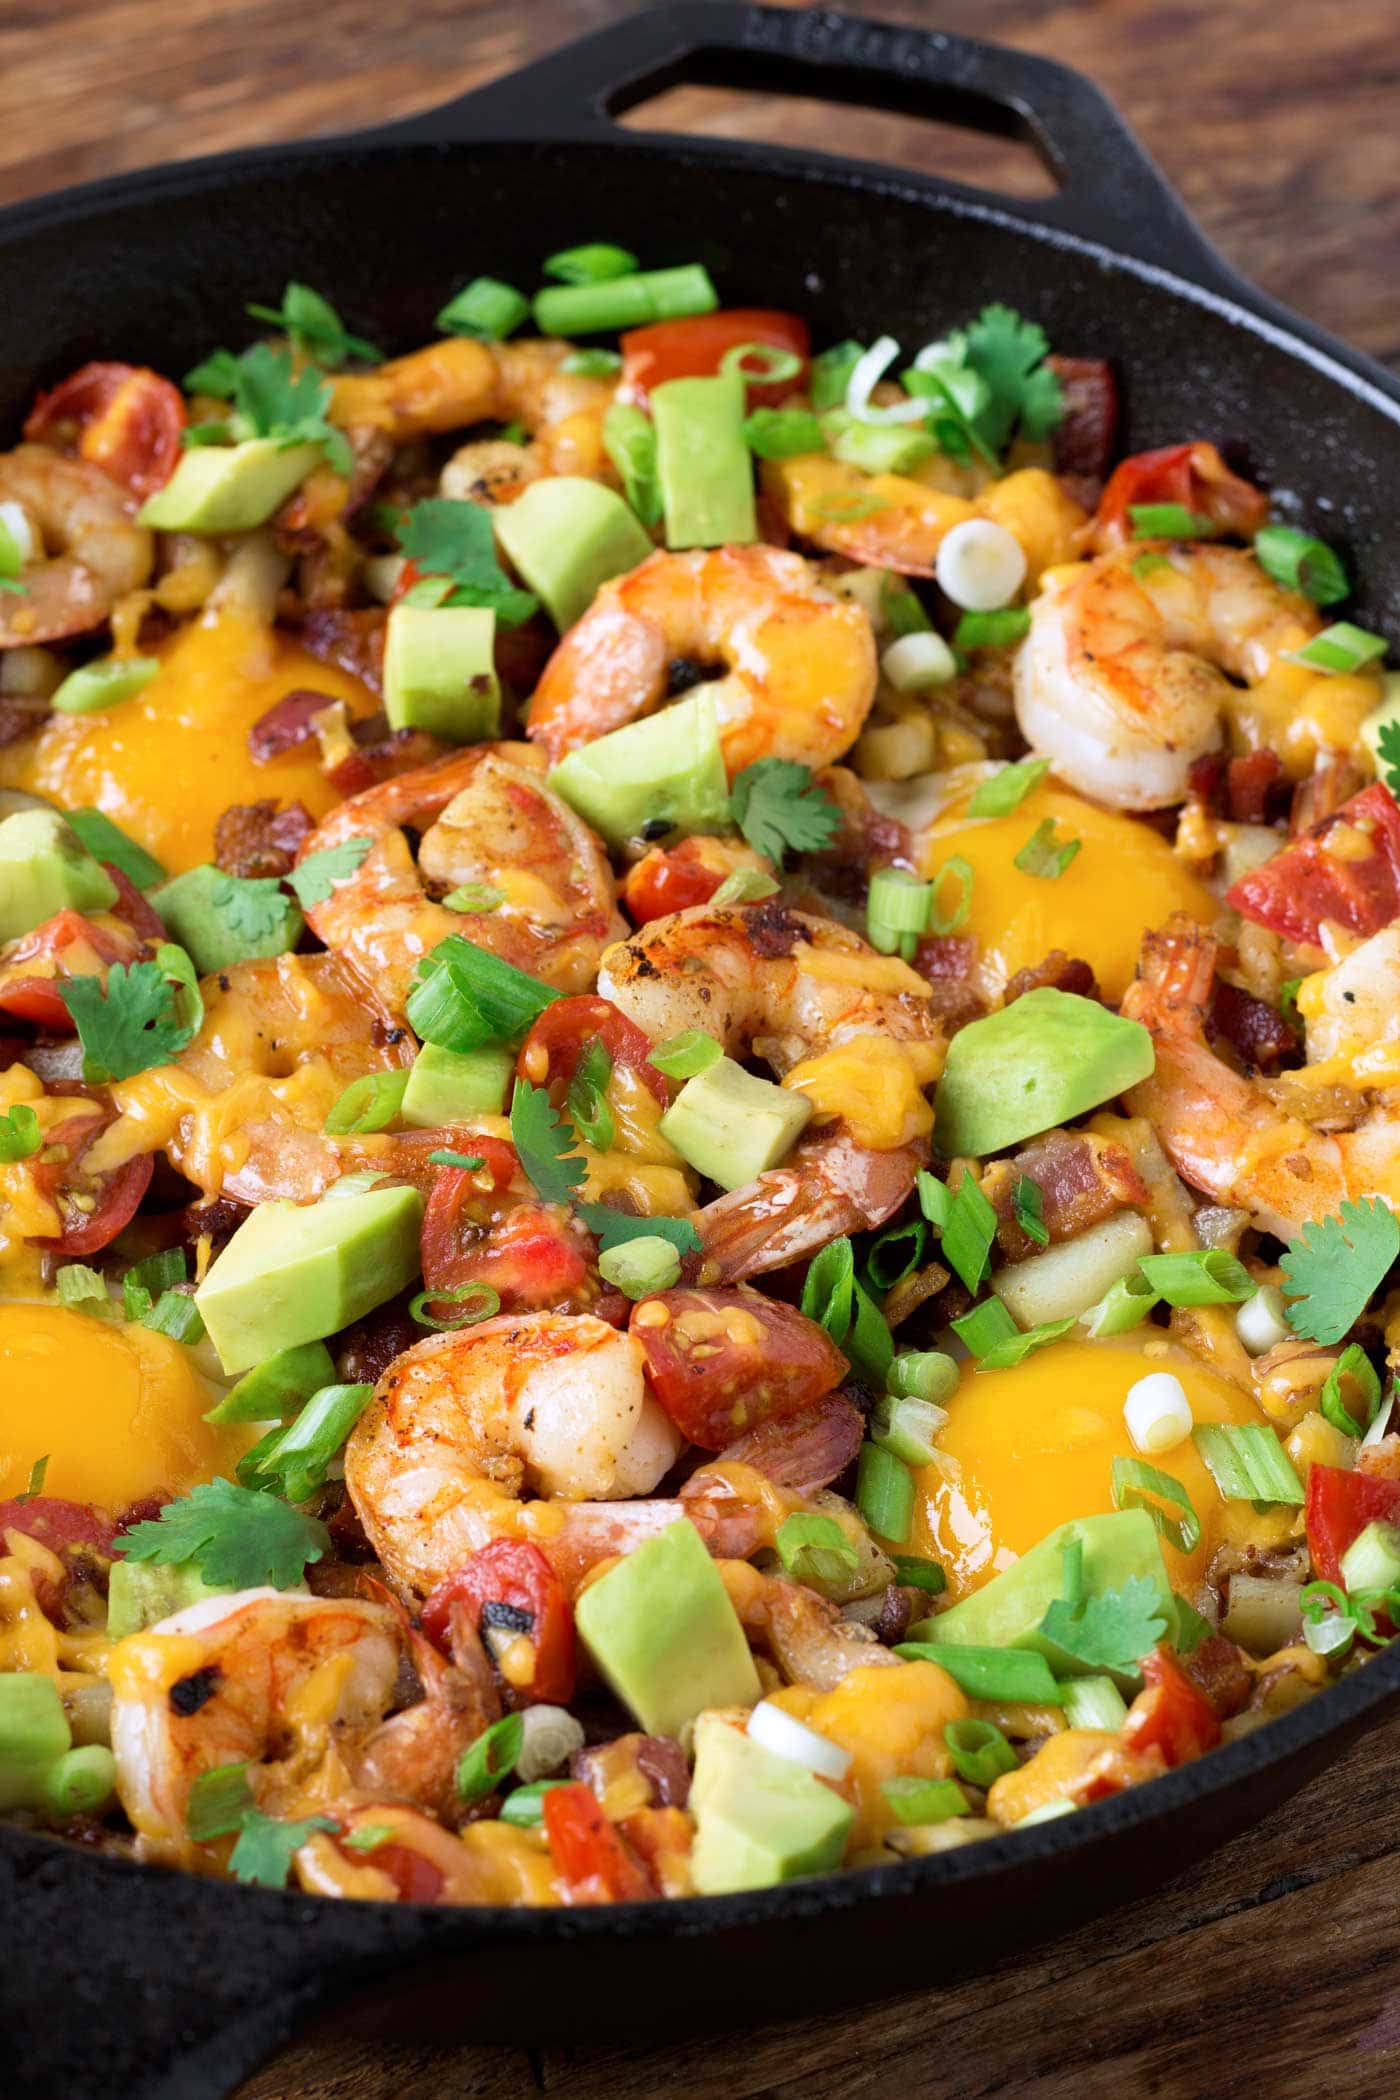 #brunchgoals! This healthy and delicous Coastal Breakfast Skillet recipe is perfect for a weekend brunch or breakfast and so easy to make! It's paleo, gluten free, and can be made dairy free and low carb/keto.